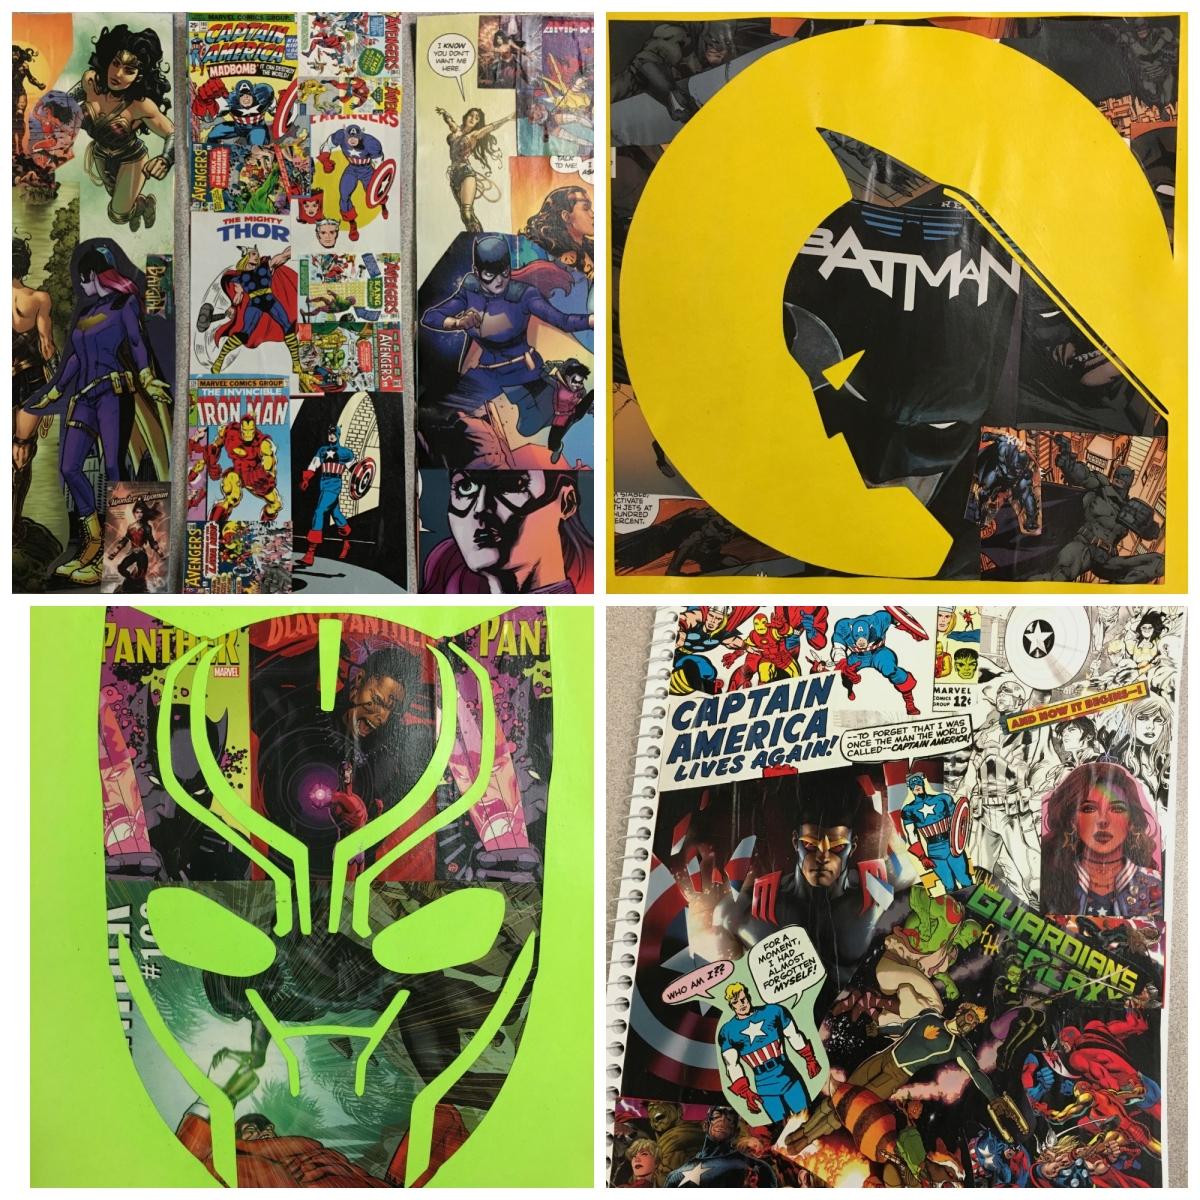 Collage of bookmarks made from comic book pages, Batman comic book art, Black Panther comic book art, and a notebook collaged in comic book pages